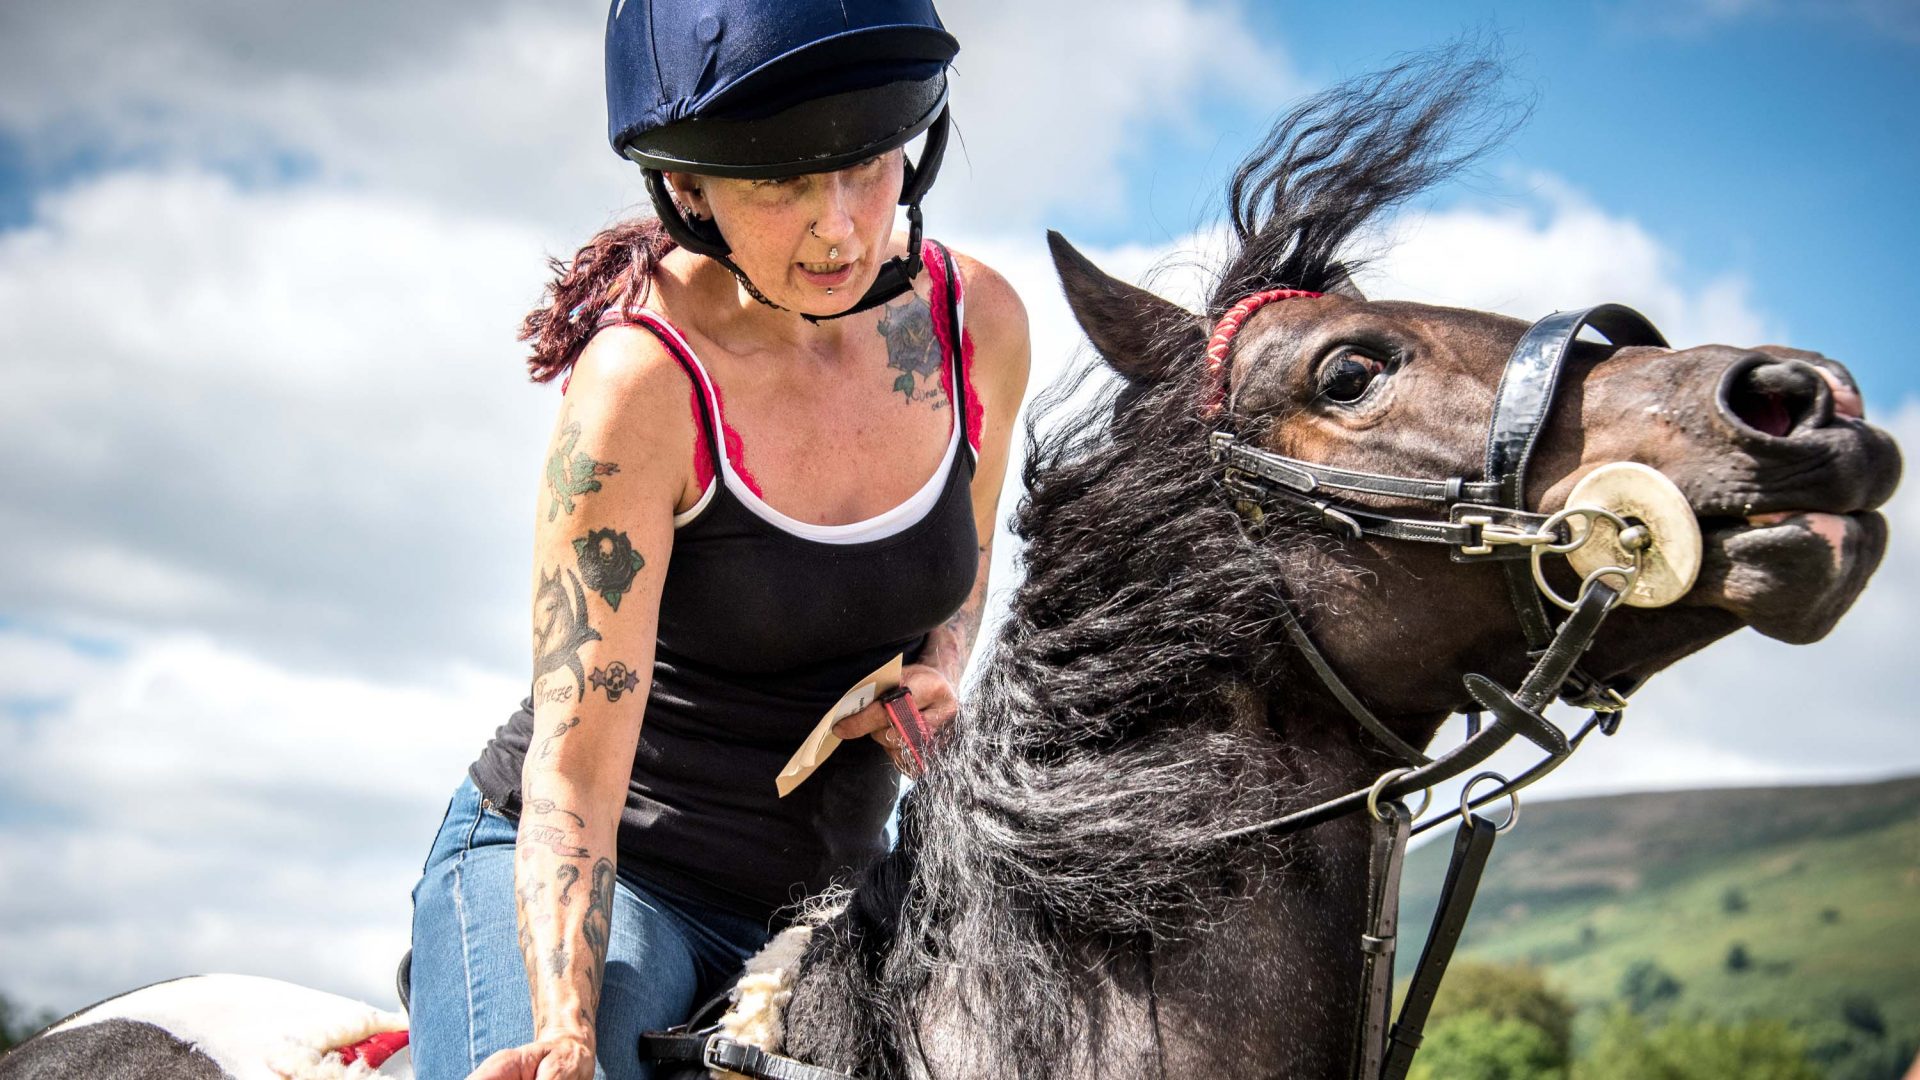 In photos: Mares and deck chairs at a remote Welsh country fair